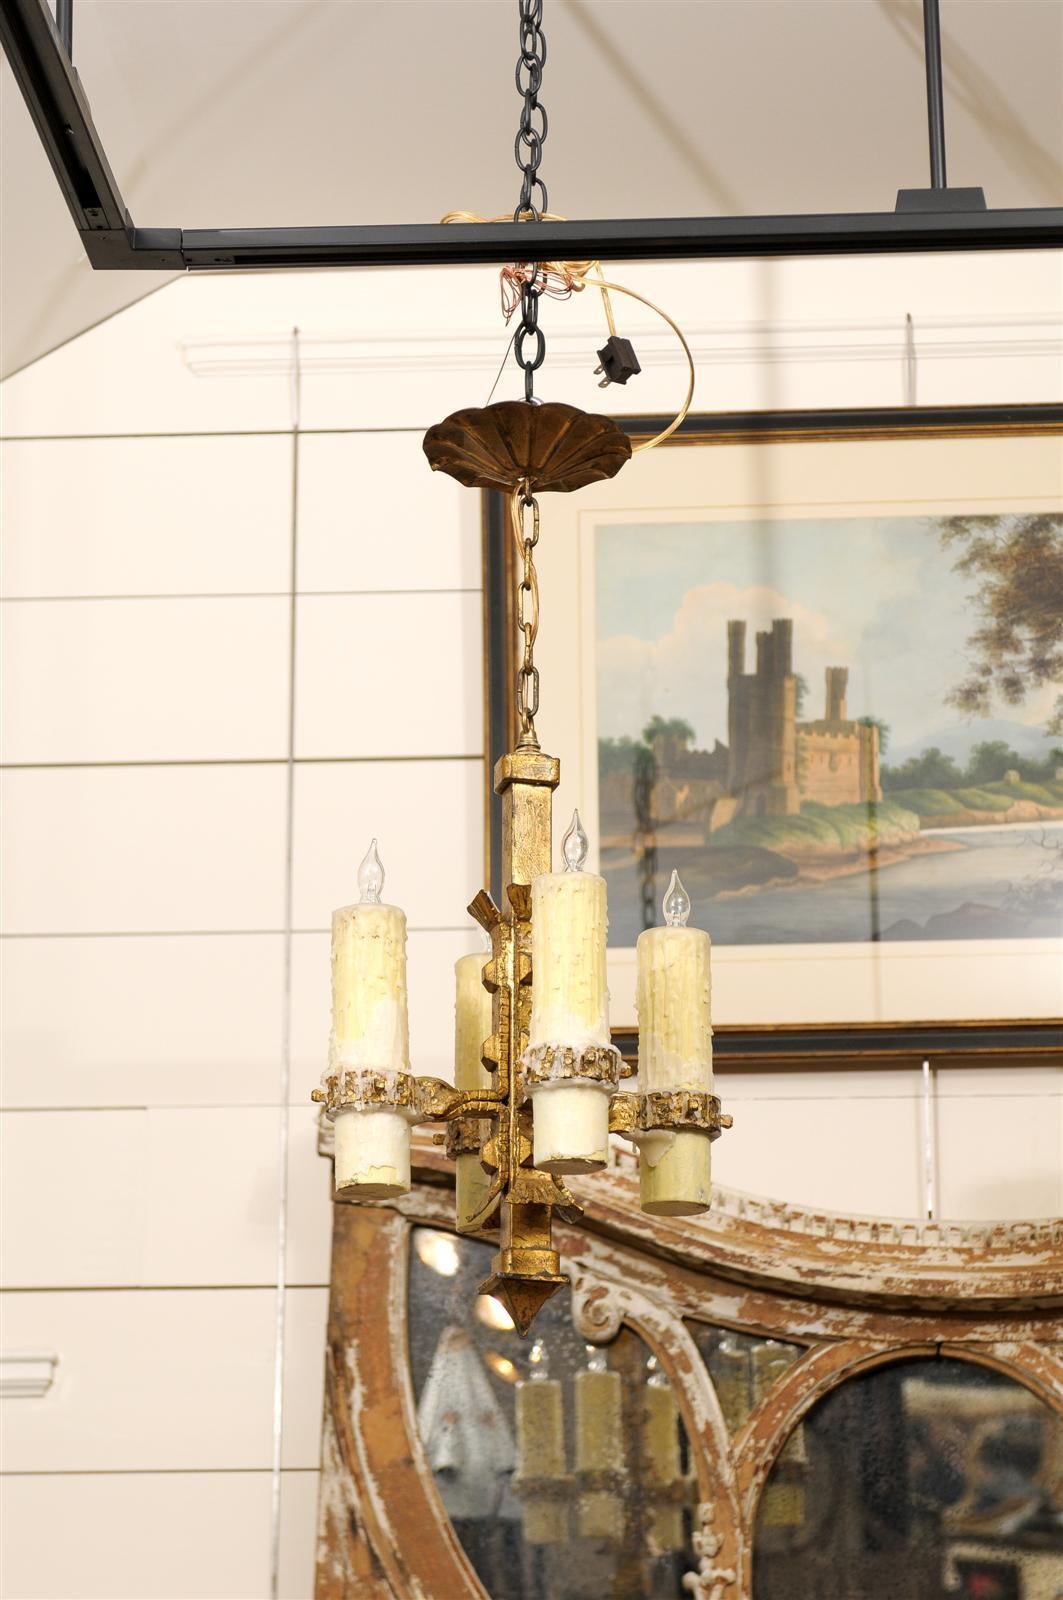 A vintage French gilt iron four-light small size chandelier. This French light chandelier from circa 1950 features a central gilded iron armature to which four arms are elegantly attached, each holding a large size authentic wax candle. This central